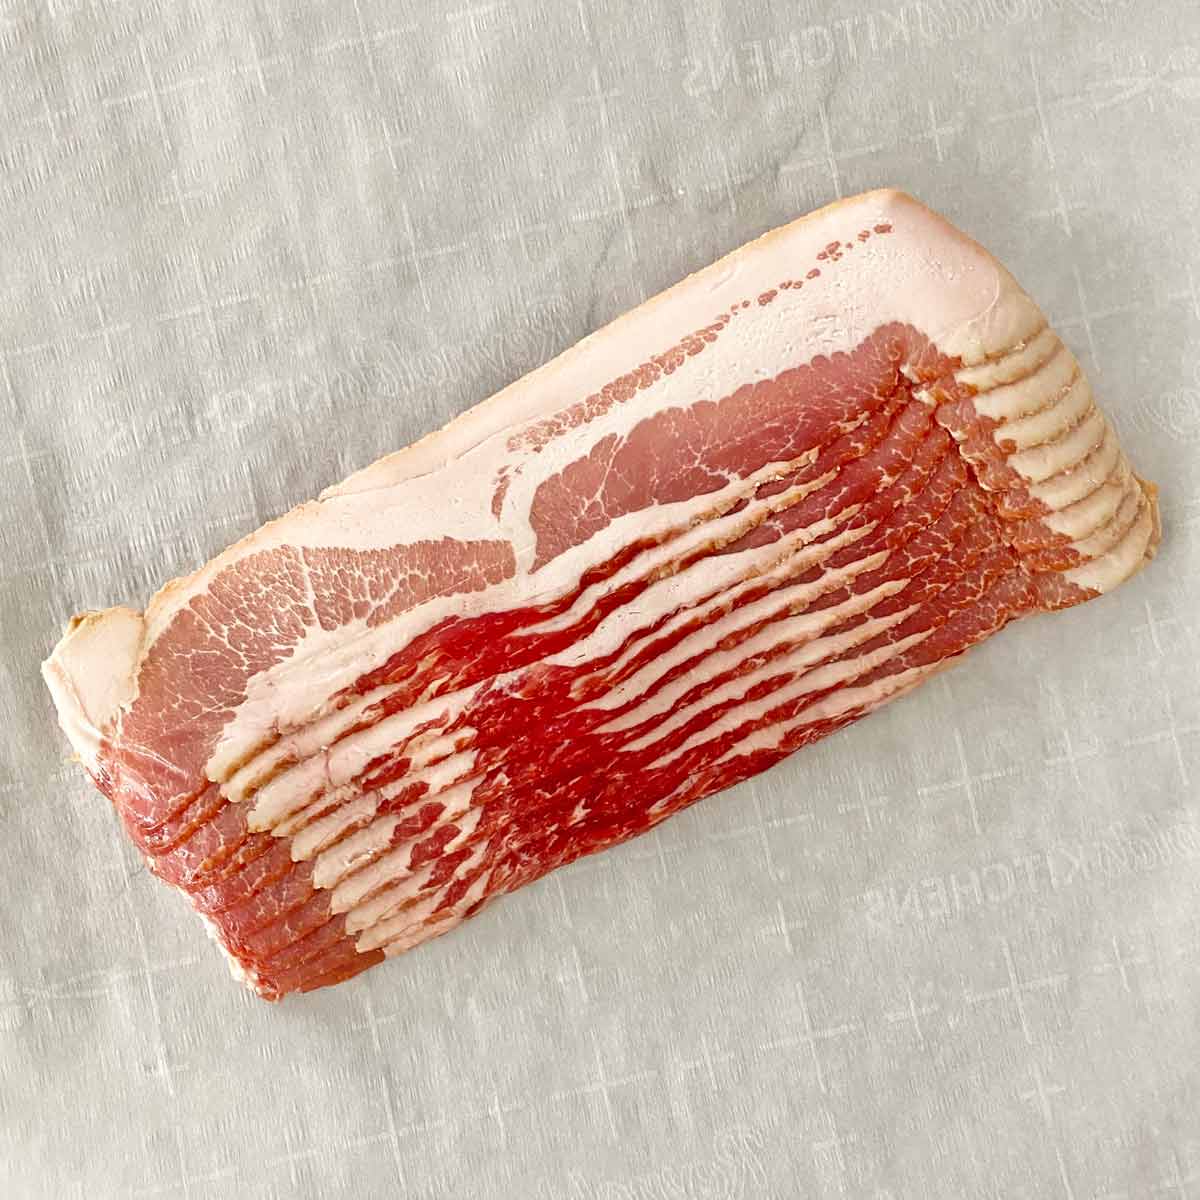 A pound of uncooked bacon on parchment paper.